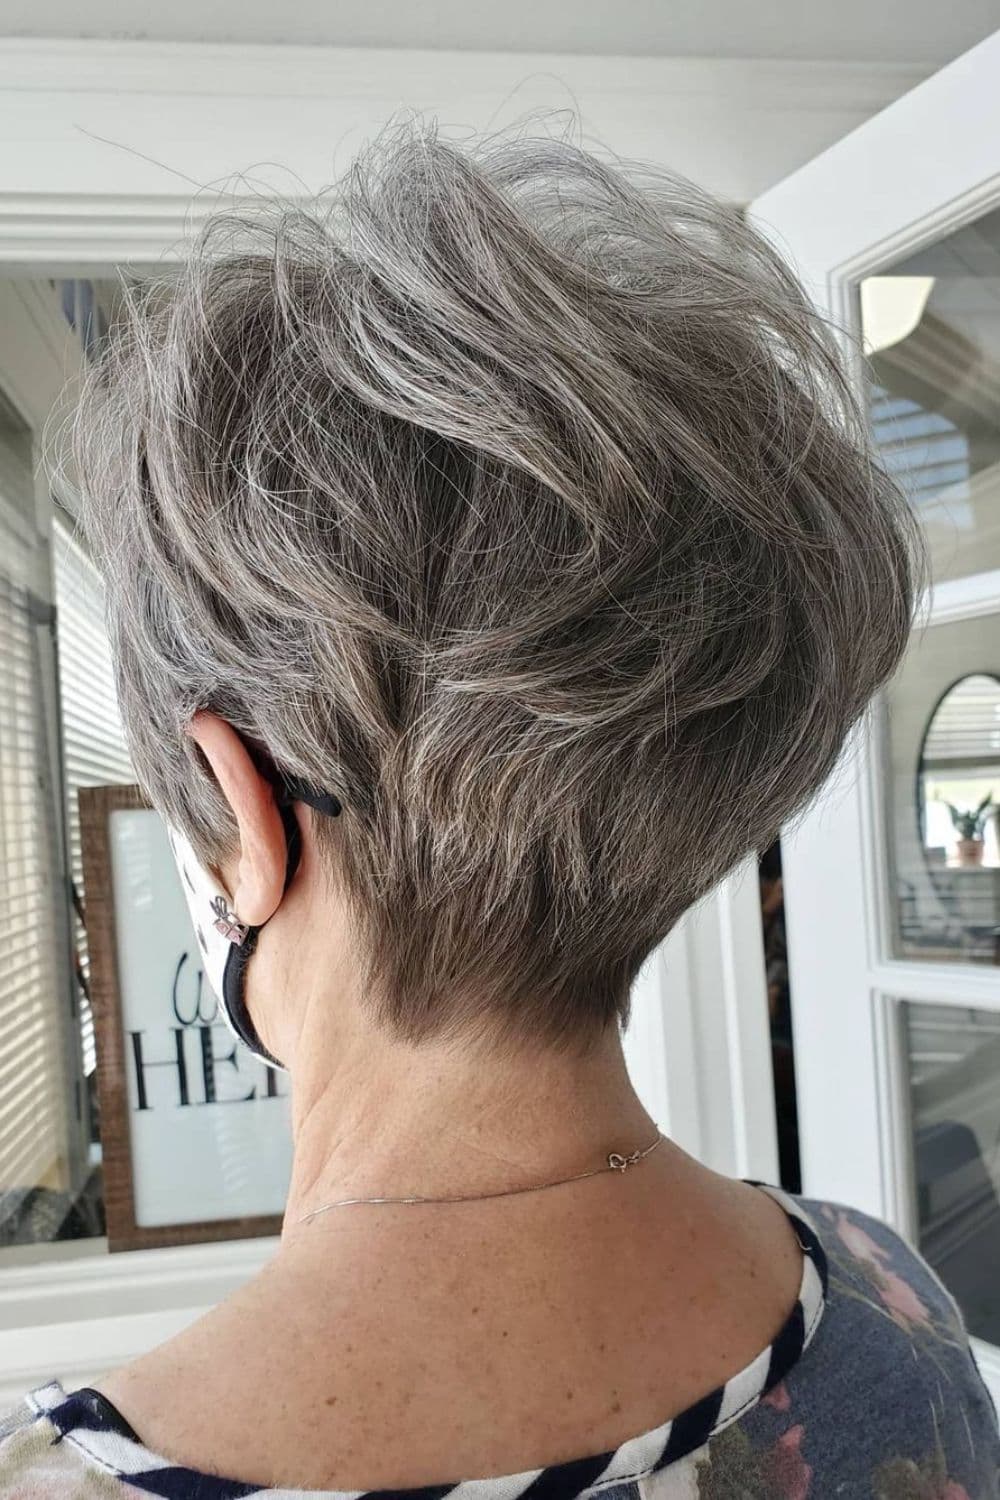 A woman's back with gray wavy tapered pixie cut.